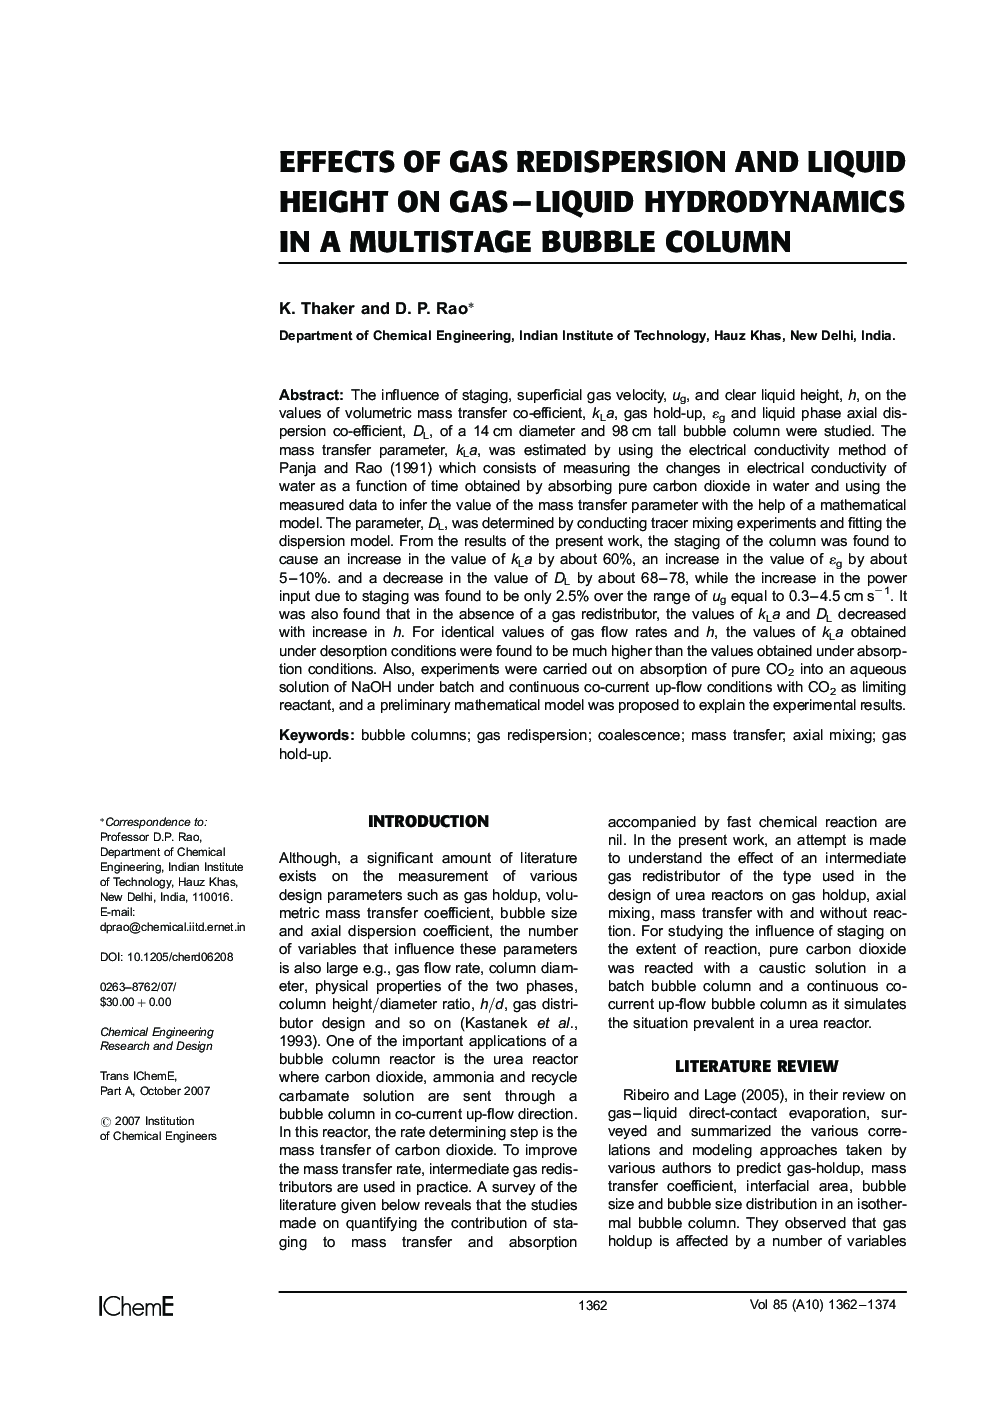 Effects of Gas Redispersion and Liquid Height on Gas–Liquid Hydrodynamics in a Multistage Bubble Column